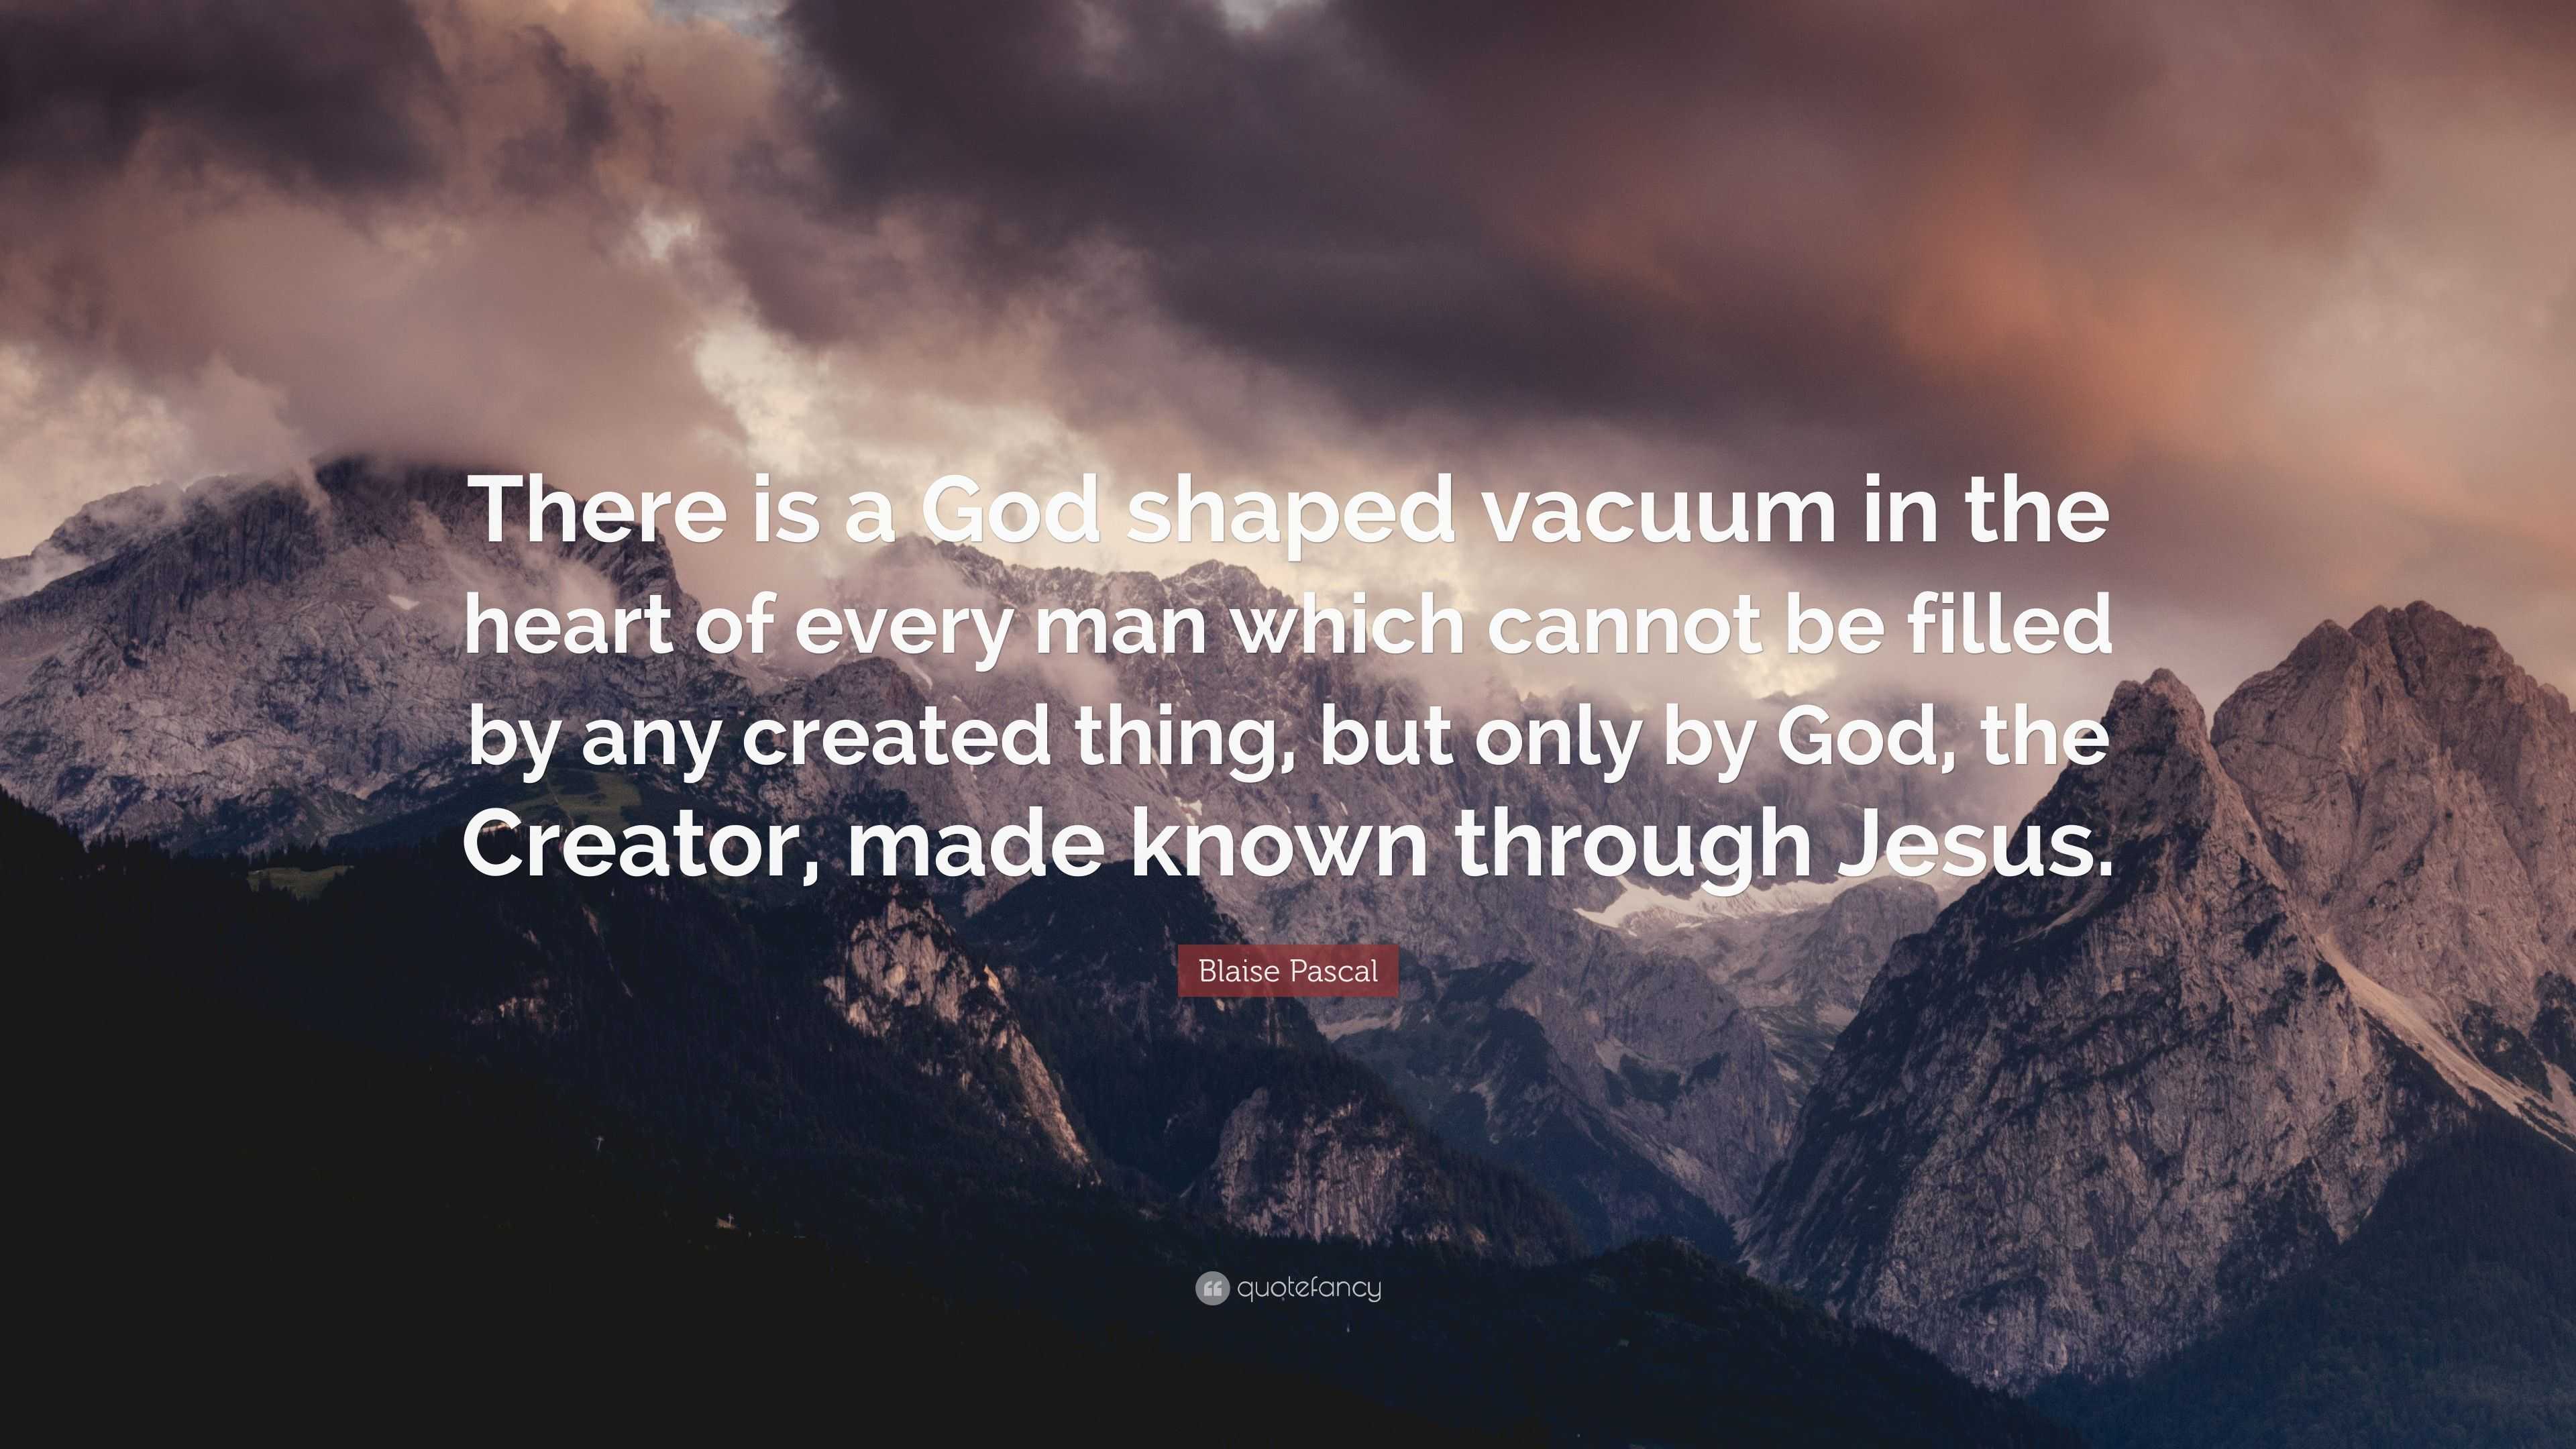 Blaise Pascal Quote: “There is a God shaped vacuum in the heart of